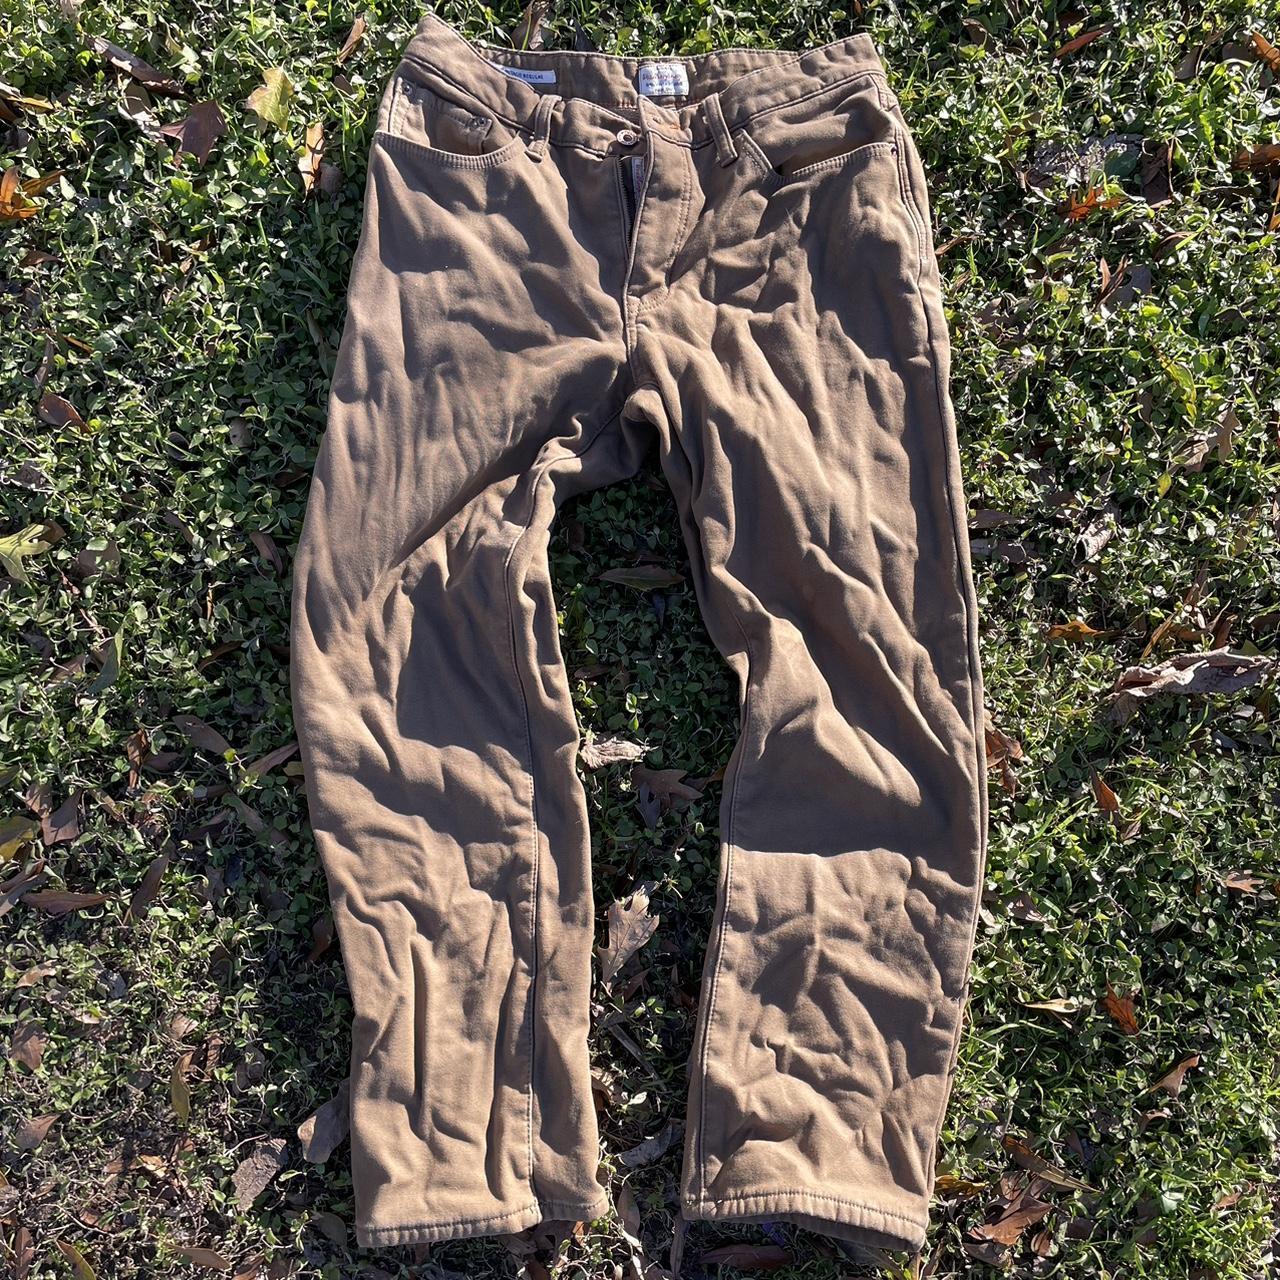 Weather Proof Vintage Pants Any good? 